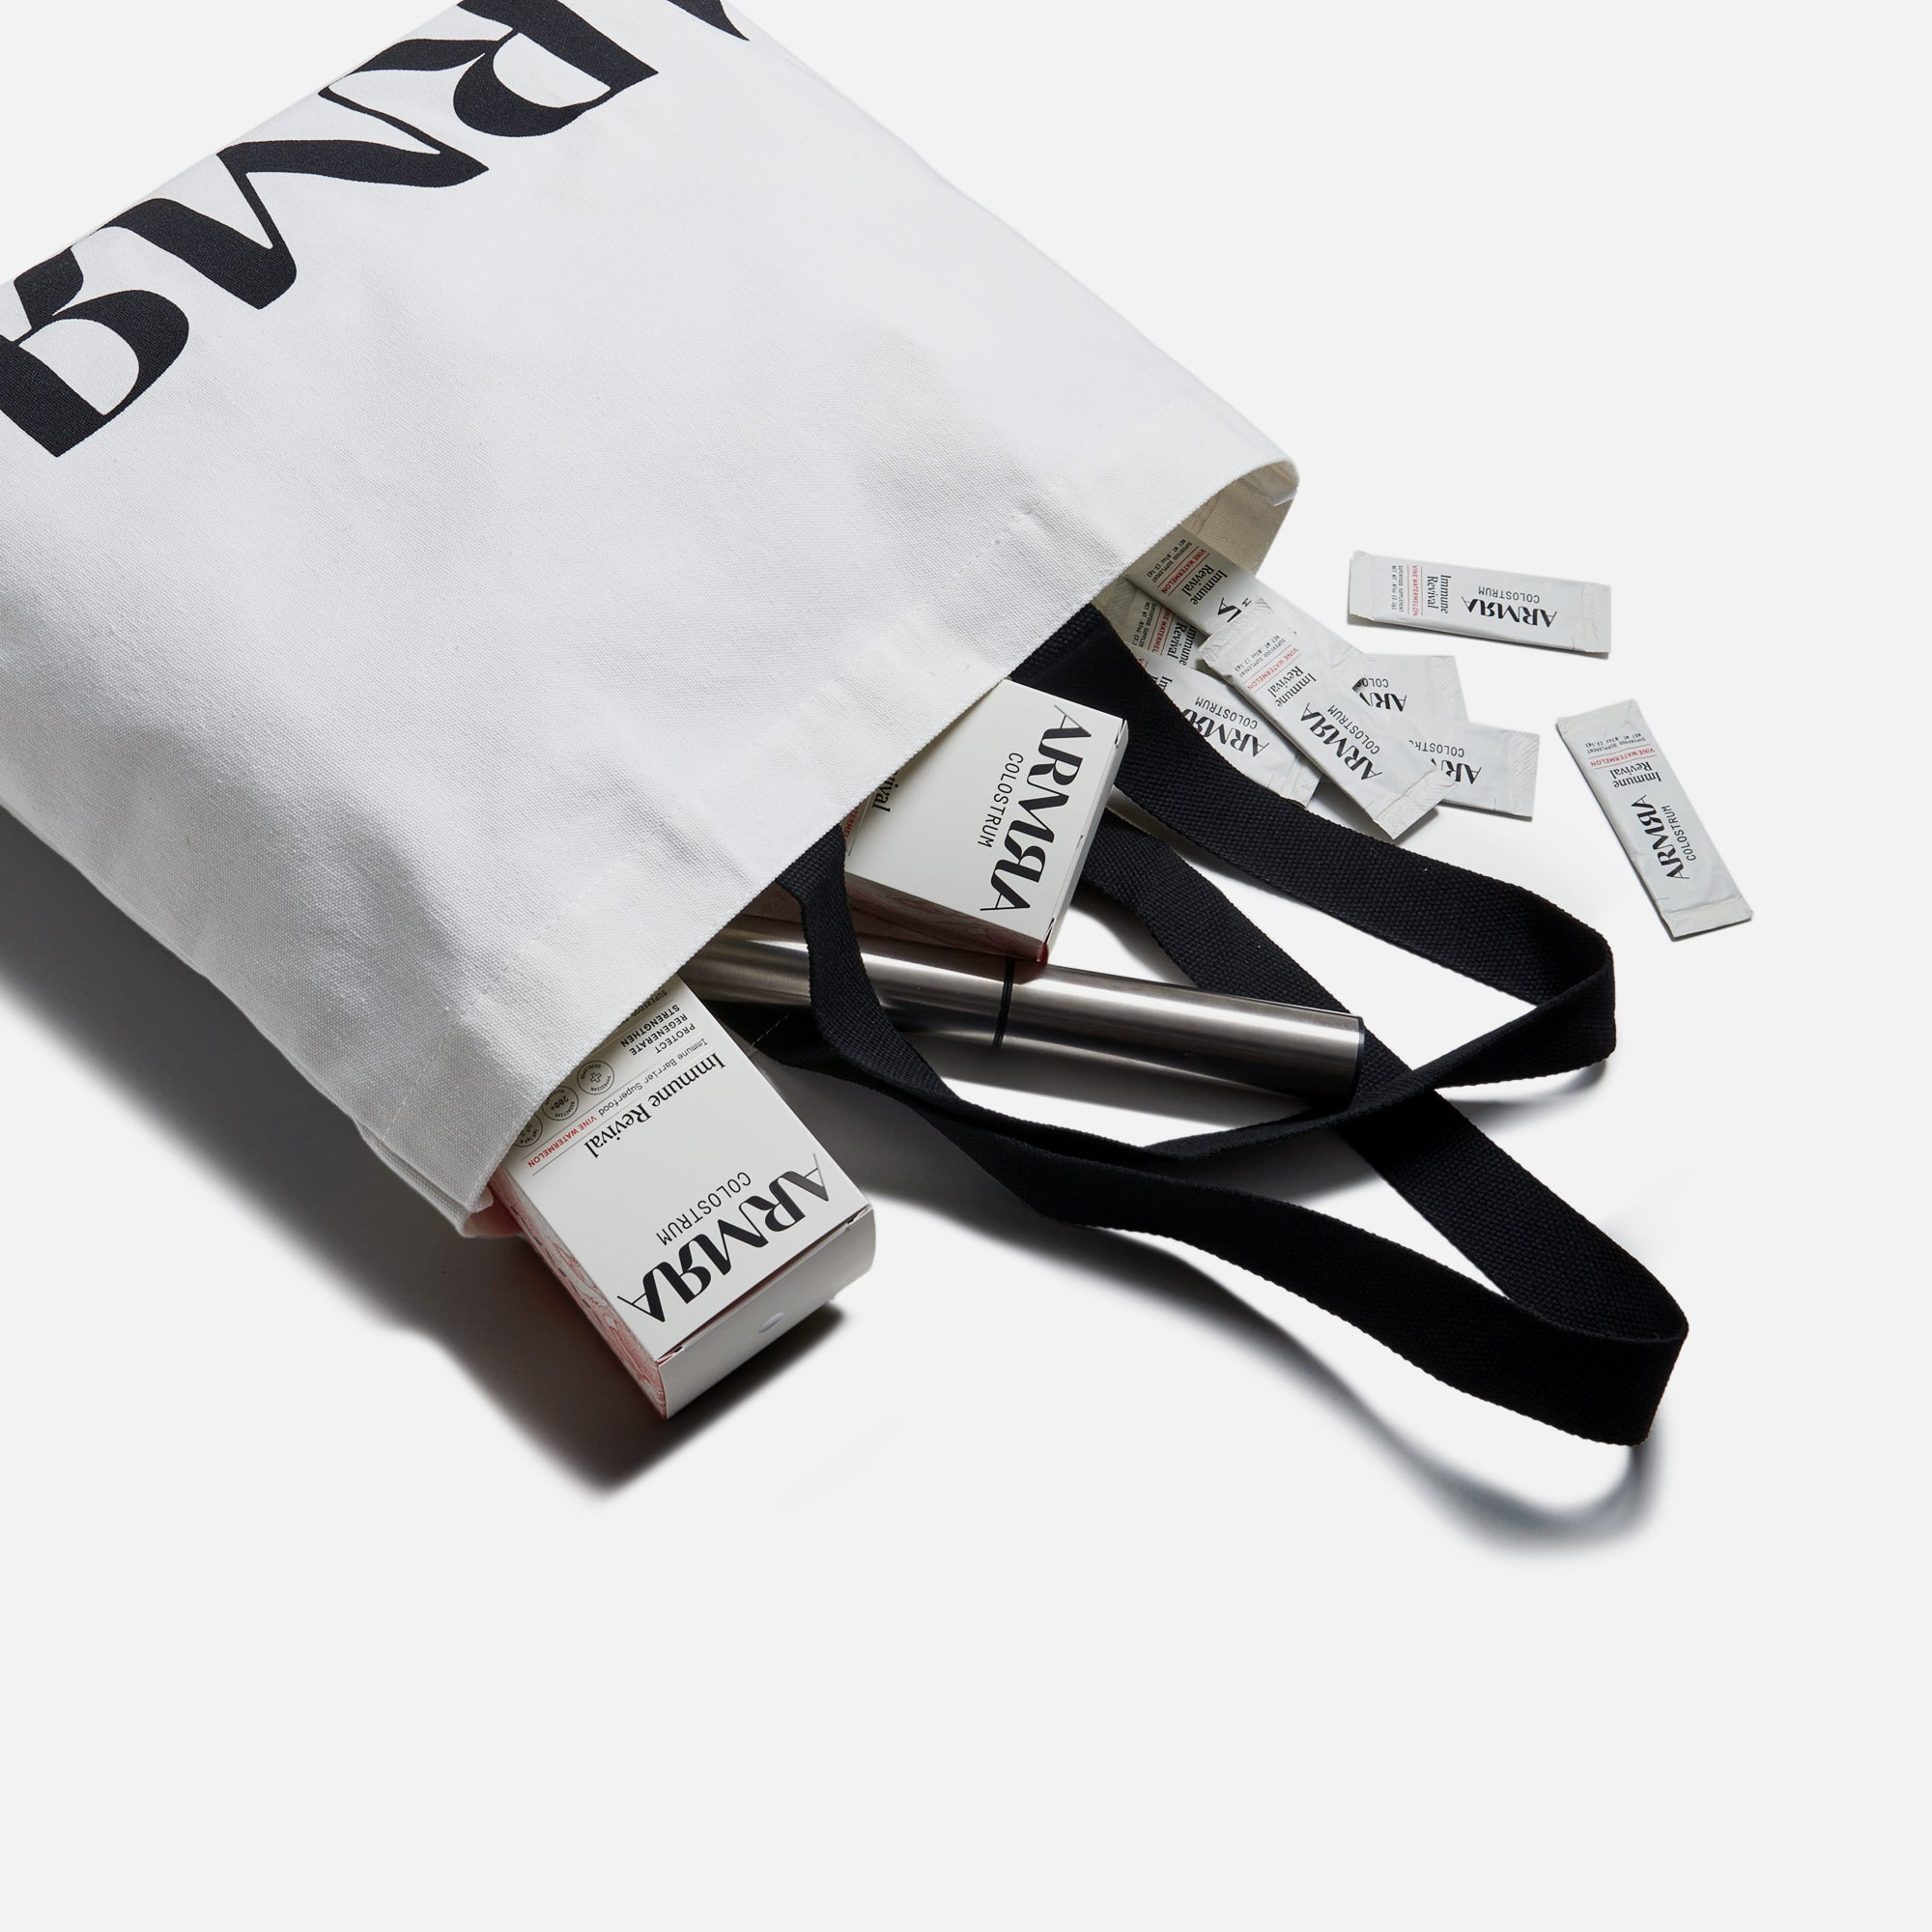 White tote with black handles laying down with product boxes, product pouches and stainless steel spilling out